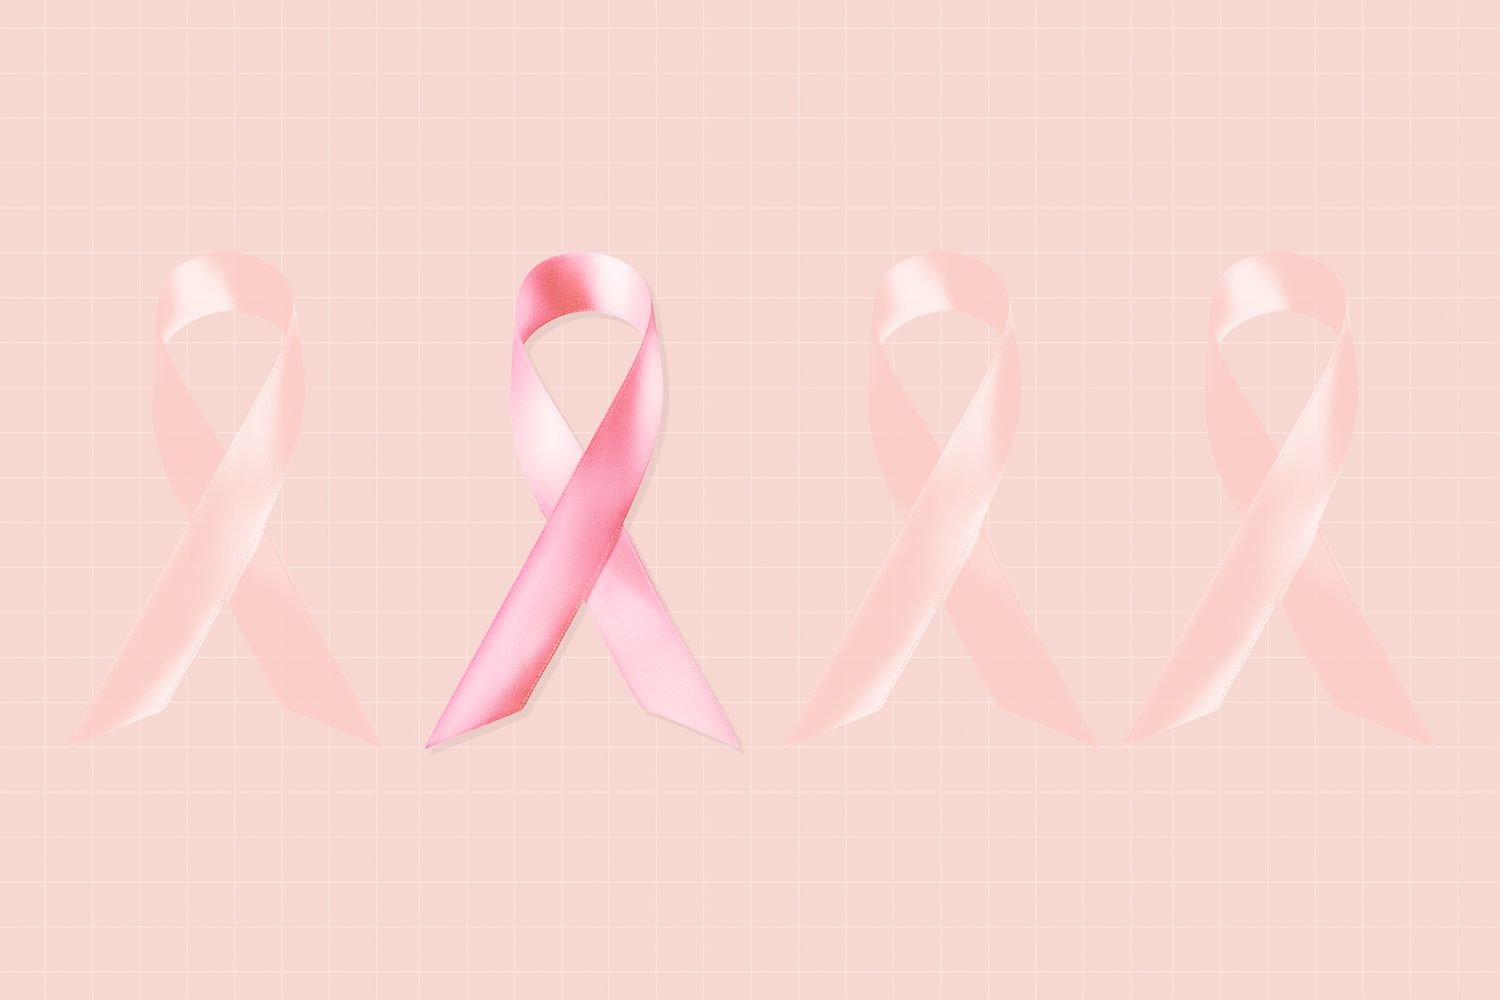 4 Breast cancer ribbons on a pink backgrounnd. One of the ribbons is in full color while the other 3 blend into the background